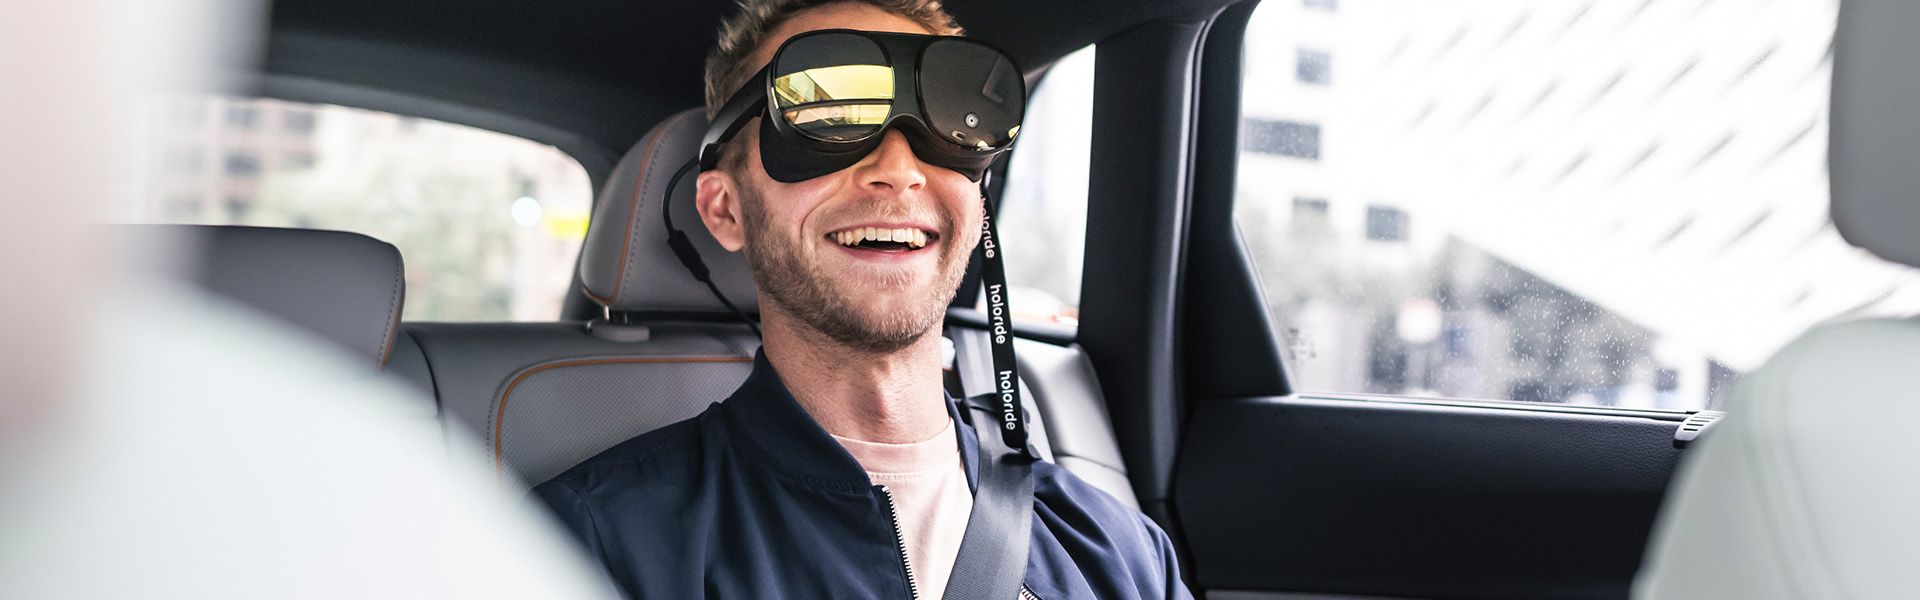 Man with vr glasses in car